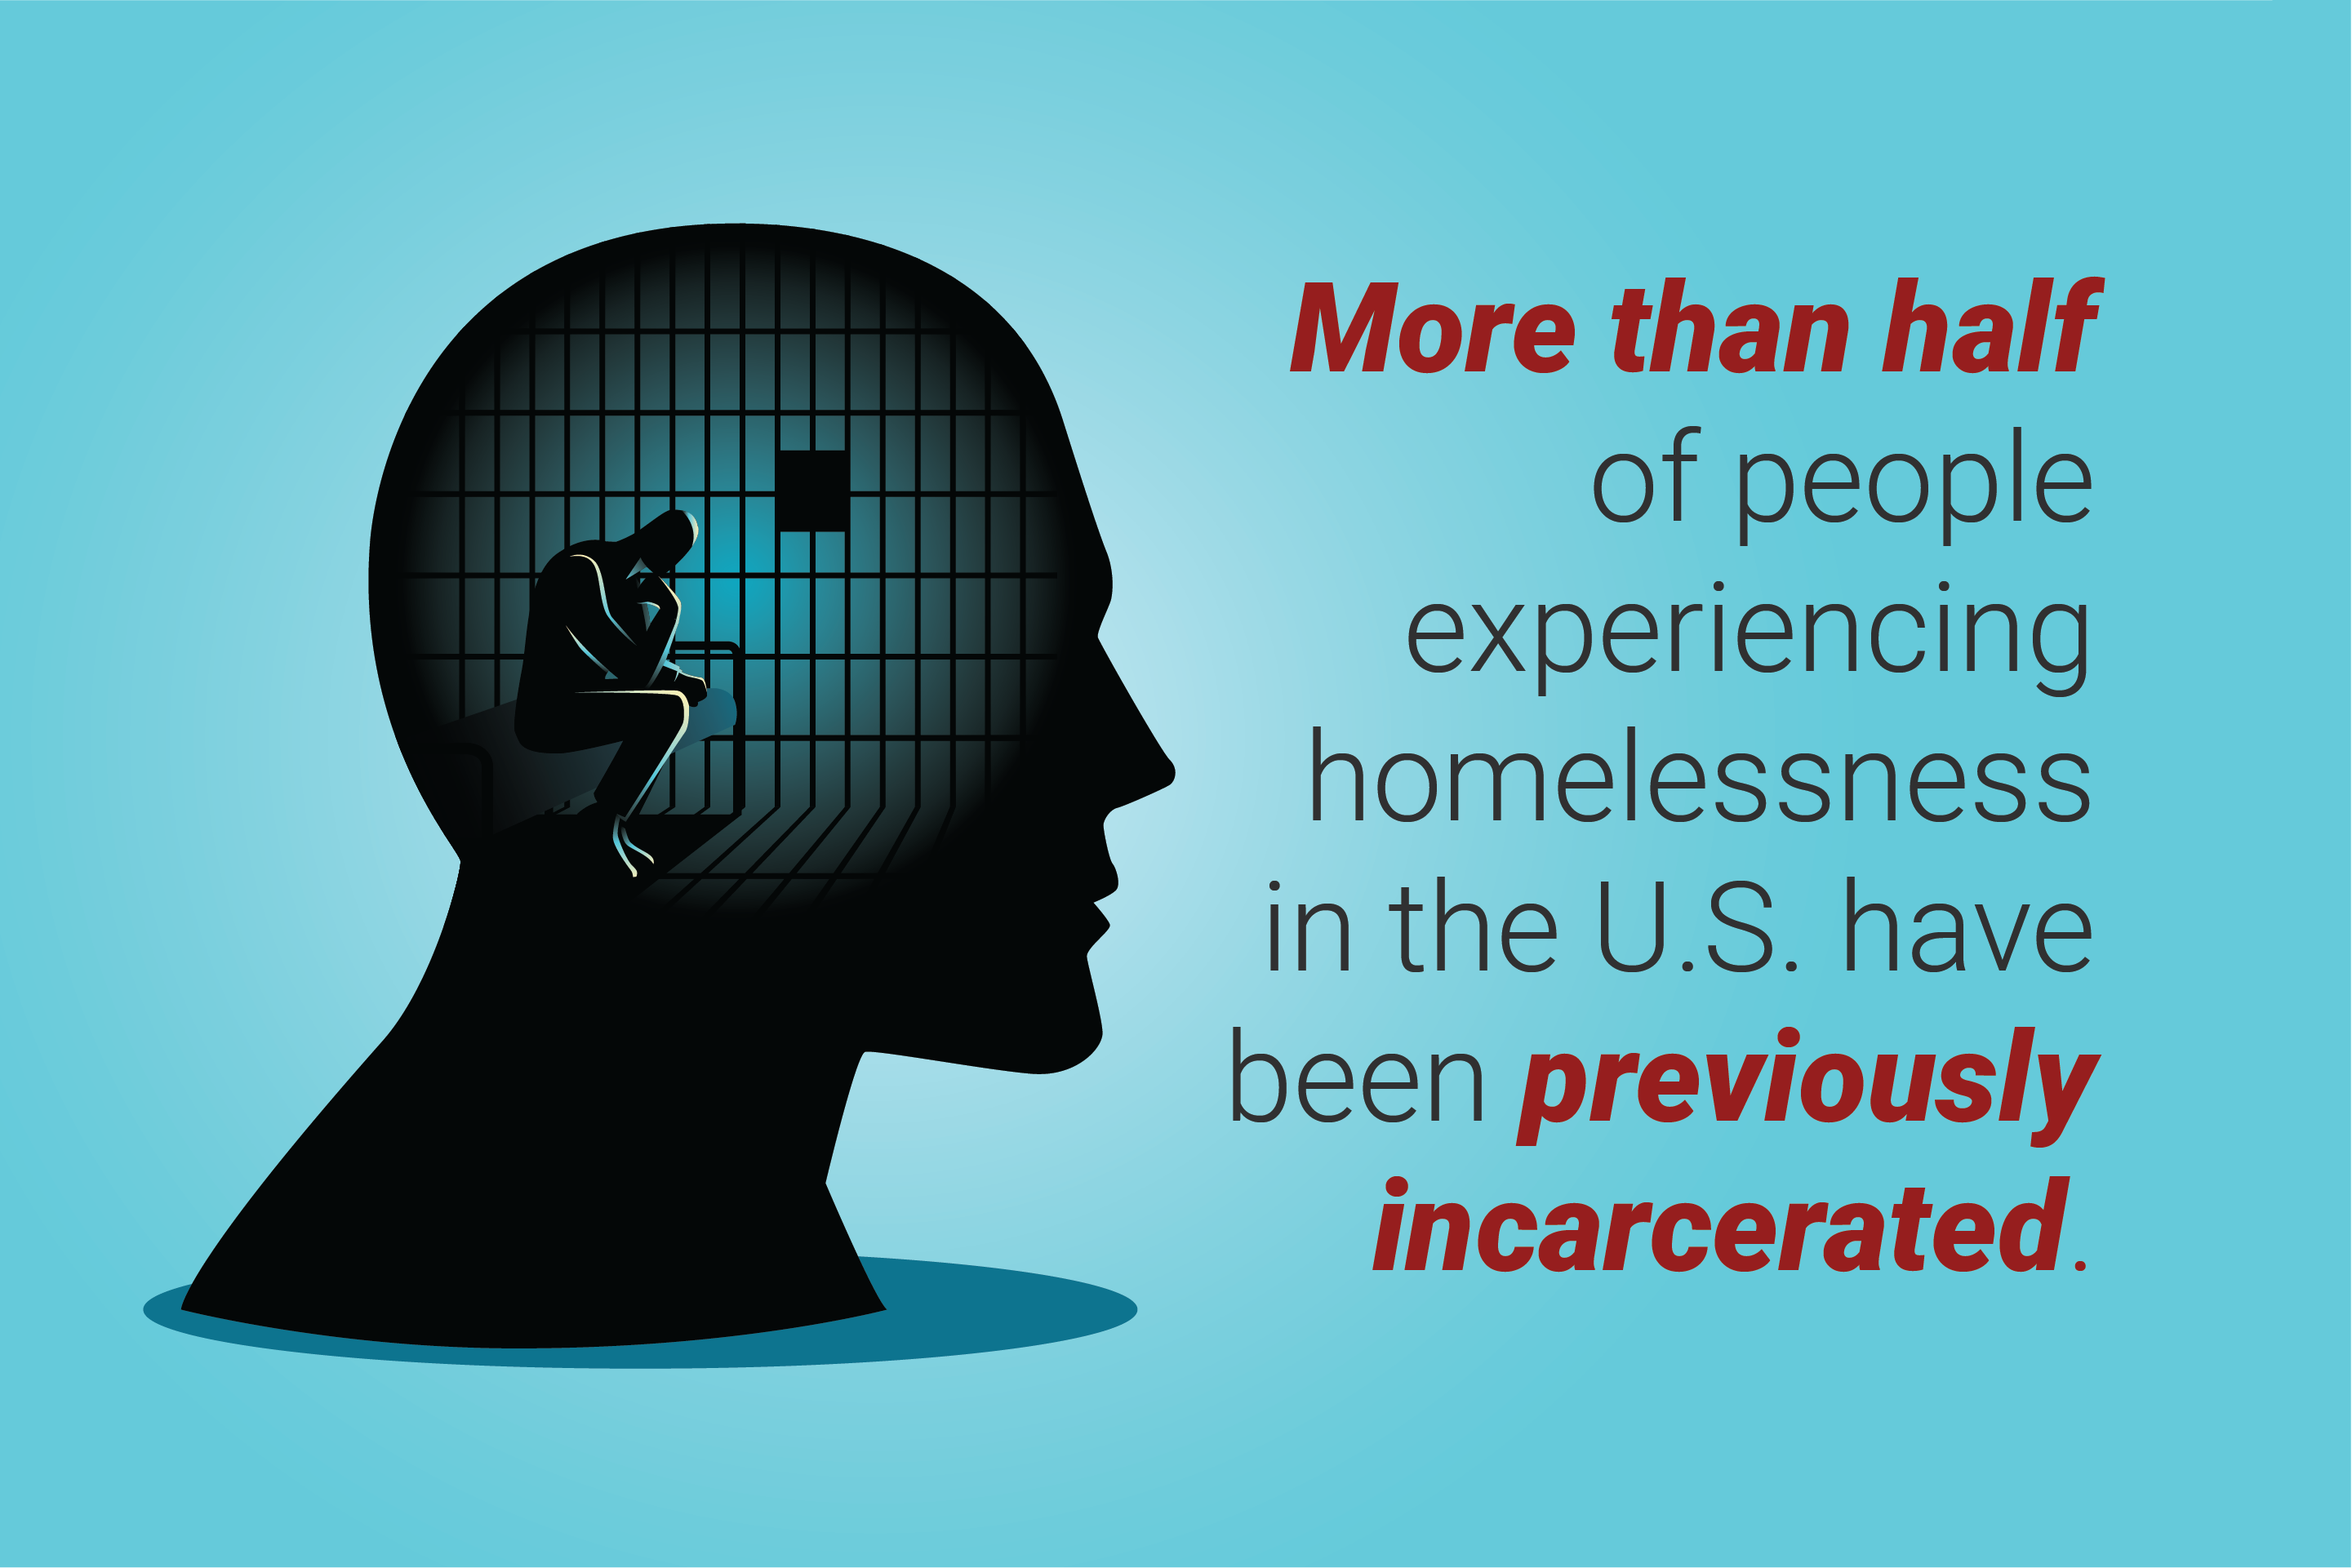 More than half of people experiencing homelessness in the U.S. have been previously incarcerated. 